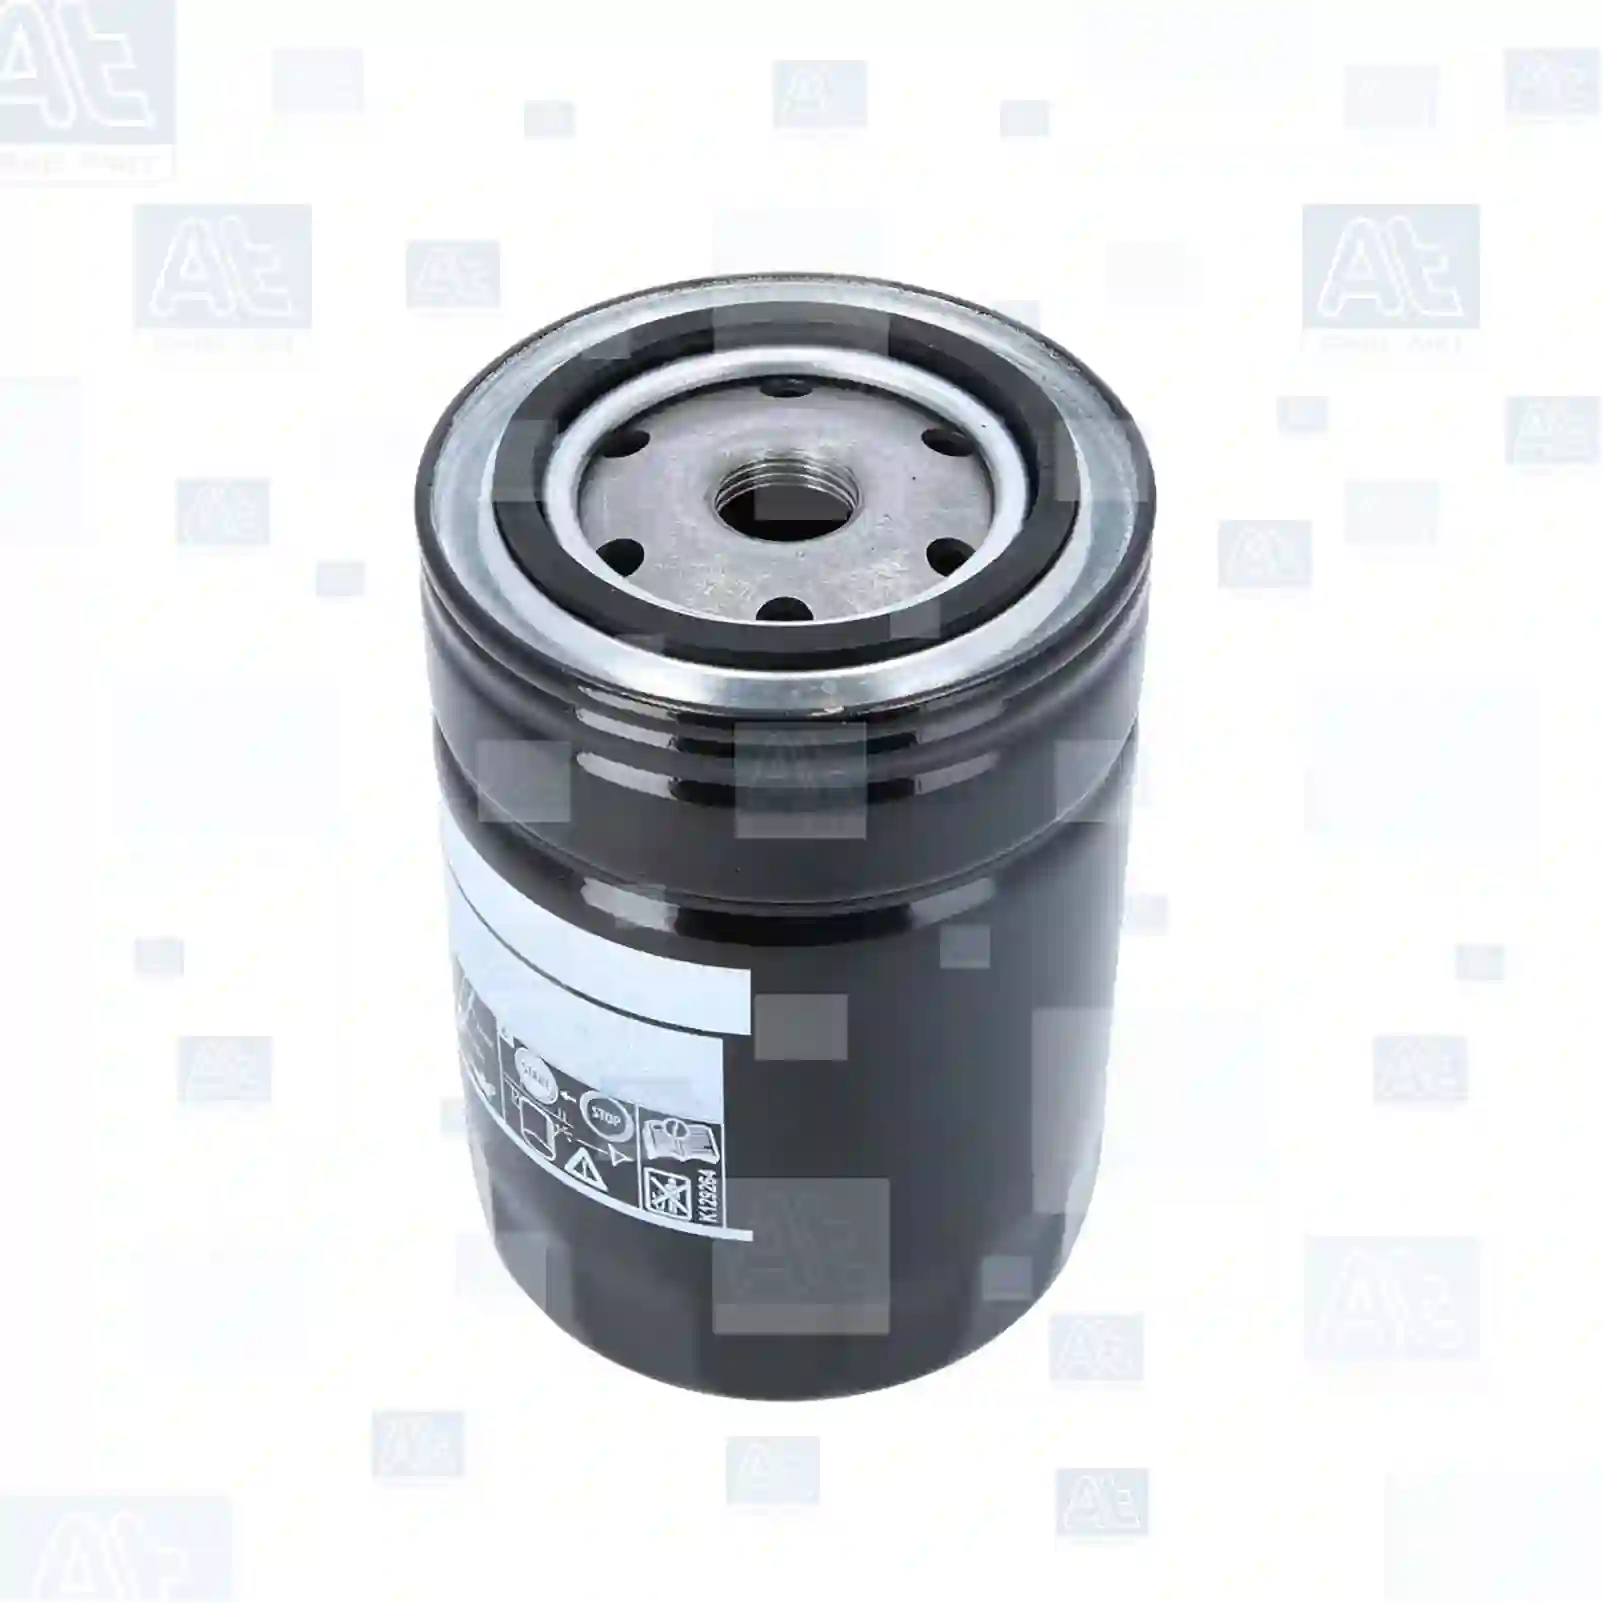 Oil filter, 77701169, 2089505, 1931165, 925229, 925229C91, 1560187700, 01909102, 00451341, 01836106, 01901602, 01907567, 01909102, 02654392, 04027979, 04135600, 04513411, 04602186, 04607360, 04608186, 04625546, 04630787, 14730587, 1901602546230, 41356000, 46307873, 62775369, 704625547, 70451341, 71961003, 74027979, 74513411, 74602186, 74607360, 74608186, 74625546, 74630687, 74630787, 74730587, 75144632, 75413411, 86546609, 5000862, 5001386, 9613343, DNP553411, 5579920, 5579970, 7984951, 24419340010, 01901602, 01907567, 03141914, 03563591, 1901602, 1907567, 24151018, 5000044487, 74027979, 74730587, 70000-5750-0, 00411553001, 24419340010, 01901602, 01909102, 02654392, 04027979, 04135600, 04222406, 04602186, 04607360, 04608186, 04625546, 04630787, 04730587, 71961003, 74027979, 74513411, 00024151017, 2704880M1, 84221215, 993071, 0500044487, 6000141020, 6005019791, 6005025600, 6005919776, LUS35, 0411553001, 04115560, 04415530, 24419340010, 244193499, 1909102, 795660, 7956600, 400000401 ||  77701169 At Spare Part | Engine, Accelerator Pedal, Camshaft, Connecting Rod, Crankcase, Crankshaft, Cylinder Head, Engine Suspension Mountings, Exhaust Manifold, Exhaust Gas Recirculation, Filter Kits, Flywheel Housing, General Overhaul Kits, Engine, Intake Manifold, Oil Cleaner, Oil Cooler, Oil Filter, Oil Pump, Oil Sump, Piston & Liner, Sensor & Switch, Timing Case, Turbocharger, Cooling System, Belt Tensioner, Coolant Filter, Coolant Pipe, Corrosion Prevention Agent, Drive, Expansion Tank, Fan, Intercooler, Monitors & Gauges, Radiator, Thermostat, V-Belt / Timing belt, Water Pump, Fuel System, Electronical Injector Unit, Feed Pump, Fuel Filter, cpl., Fuel Gauge Sender,  Fuel Line, Fuel Pump, Fuel Tank, Injection Line Kit, Injection Pump, Exhaust System, Clutch & Pedal, Gearbox, Propeller Shaft, Axles, Brake System, Hubs & Wheels, Suspension, Leaf Spring, Universal Parts / Accessories, Steering, Electrical System, Cabin Oil filter, 77701169, 2089505, 1931165, 925229, 925229C91, 1560187700, 01909102, 00451341, 01836106, 01901602, 01907567, 01909102, 02654392, 04027979, 04135600, 04513411, 04602186, 04607360, 04608186, 04625546, 04630787, 14730587, 1901602546230, 41356000, 46307873, 62775369, 704625547, 70451341, 71961003, 74027979, 74513411, 74602186, 74607360, 74608186, 74625546, 74630687, 74630787, 74730587, 75144632, 75413411, 86546609, 5000862, 5001386, 9613343, DNP553411, 5579920, 5579970, 7984951, 24419340010, 01901602, 01907567, 03141914, 03563591, 1901602, 1907567, 24151018, 5000044487, 74027979, 74730587, 70000-5750-0, 00411553001, 24419340010, 01901602, 01909102, 02654392, 04027979, 04135600, 04222406, 04602186, 04607360, 04608186, 04625546, 04630787, 04730587, 71961003, 74027979, 74513411, 00024151017, 2704880M1, 84221215, 993071, 0500044487, 6000141020, 6005019791, 6005025600, 6005919776, LUS35, 0411553001, 04115560, 04415530, 24419340010, 244193499, 1909102, 795660, 7956600, 400000401 ||  77701169 At Spare Part | Engine, Accelerator Pedal, Camshaft, Connecting Rod, Crankcase, Crankshaft, Cylinder Head, Engine Suspension Mountings, Exhaust Manifold, Exhaust Gas Recirculation, Filter Kits, Flywheel Housing, General Overhaul Kits, Engine, Intake Manifold, Oil Cleaner, Oil Cooler, Oil Filter, Oil Pump, Oil Sump, Piston & Liner, Sensor & Switch, Timing Case, Turbocharger, Cooling System, Belt Tensioner, Coolant Filter, Coolant Pipe, Corrosion Prevention Agent, Drive, Expansion Tank, Fan, Intercooler, Monitors & Gauges, Radiator, Thermostat, V-Belt / Timing belt, Water Pump, Fuel System, Electronical Injector Unit, Feed Pump, Fuel Filter, cpl., Fuel Gauge Sender,  Fuel Line, Fuel Pump, Fuel Tank, Injection Line Kit, Injection Pump, Exhaust System, Clutch & Pedal, Gearbox, Propeller Shaft, Axles, Brake System, Hubs & Wheels, Suspension, Leaf Spring, Universal Parts / Accessories, Steering, Electrical System, Cabin